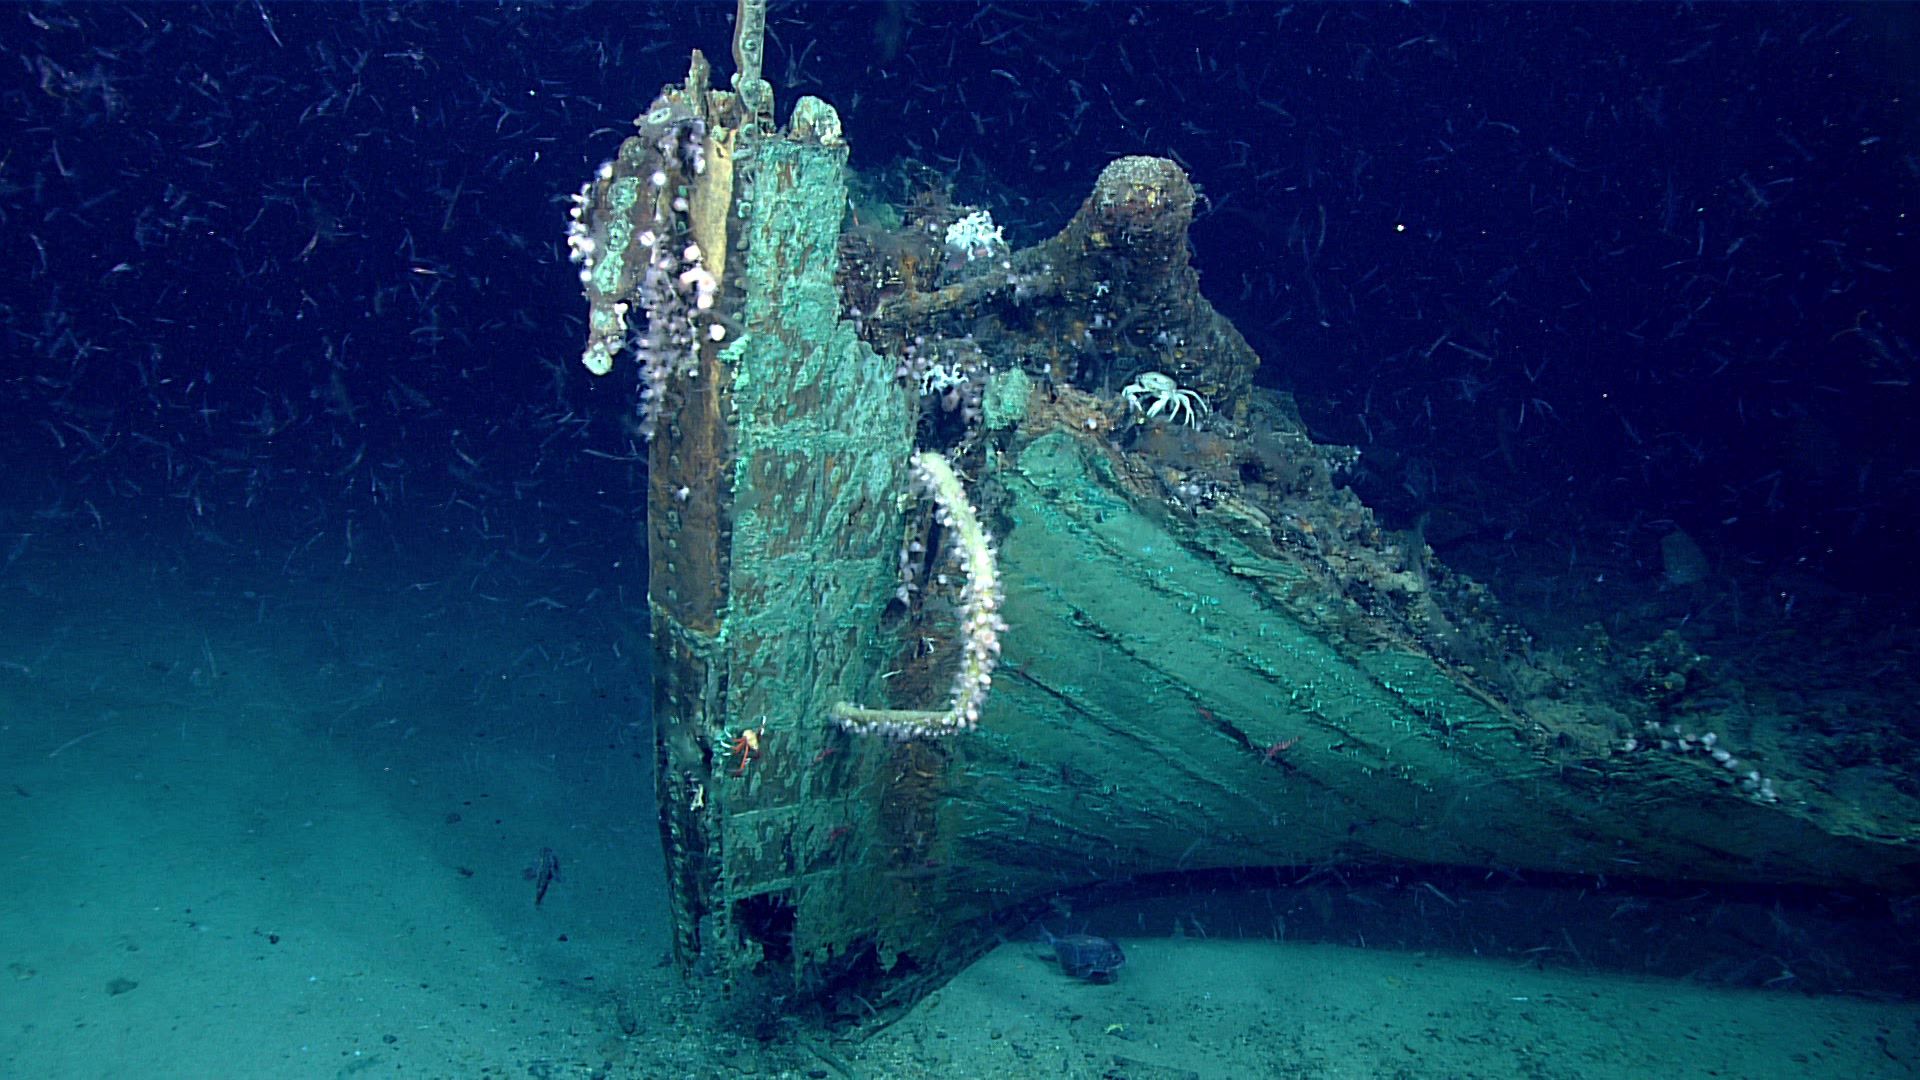 Has mystery of shipwreck exposed by erosion been solved?